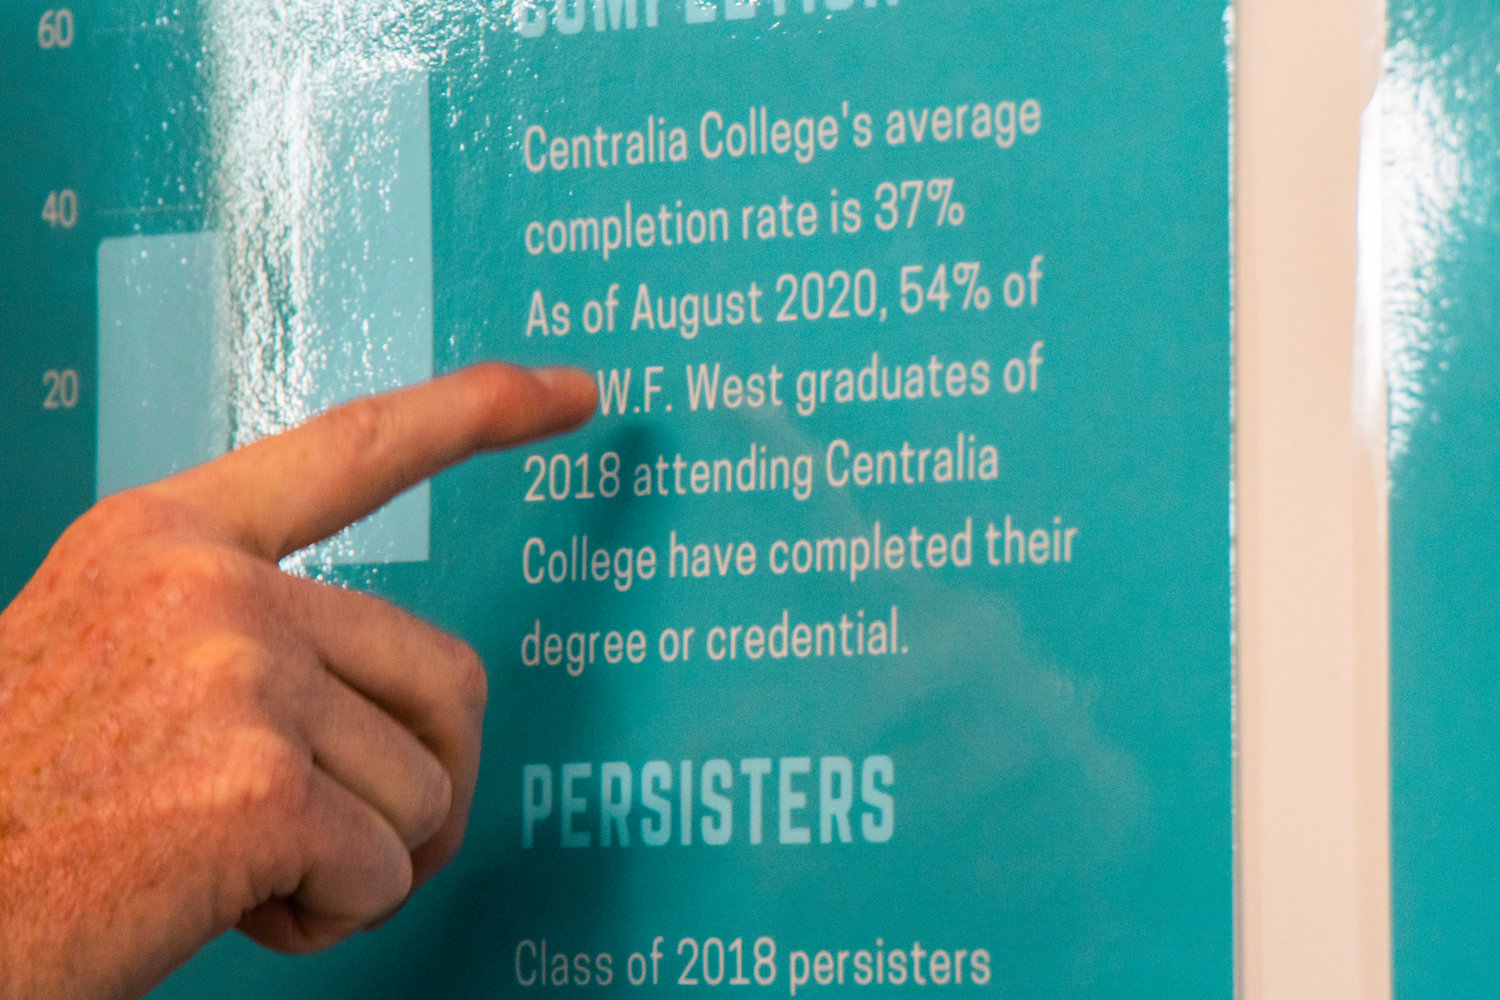 Dr. Brian Fox talks about students attending Centralia College after graduating from W.F. West, Thursday afternoon in Chehalis.